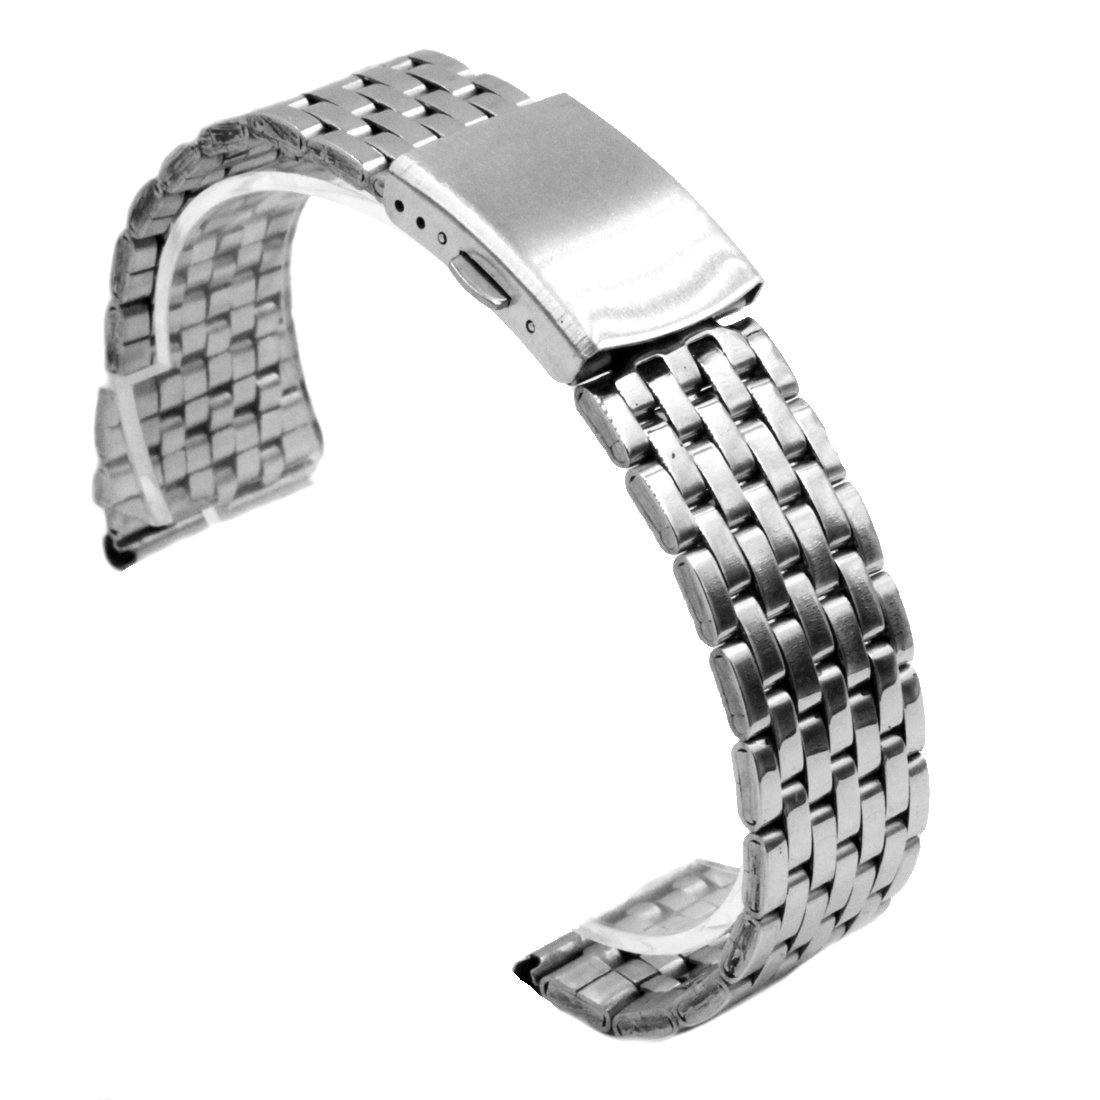 18mm stainless steel watch strap